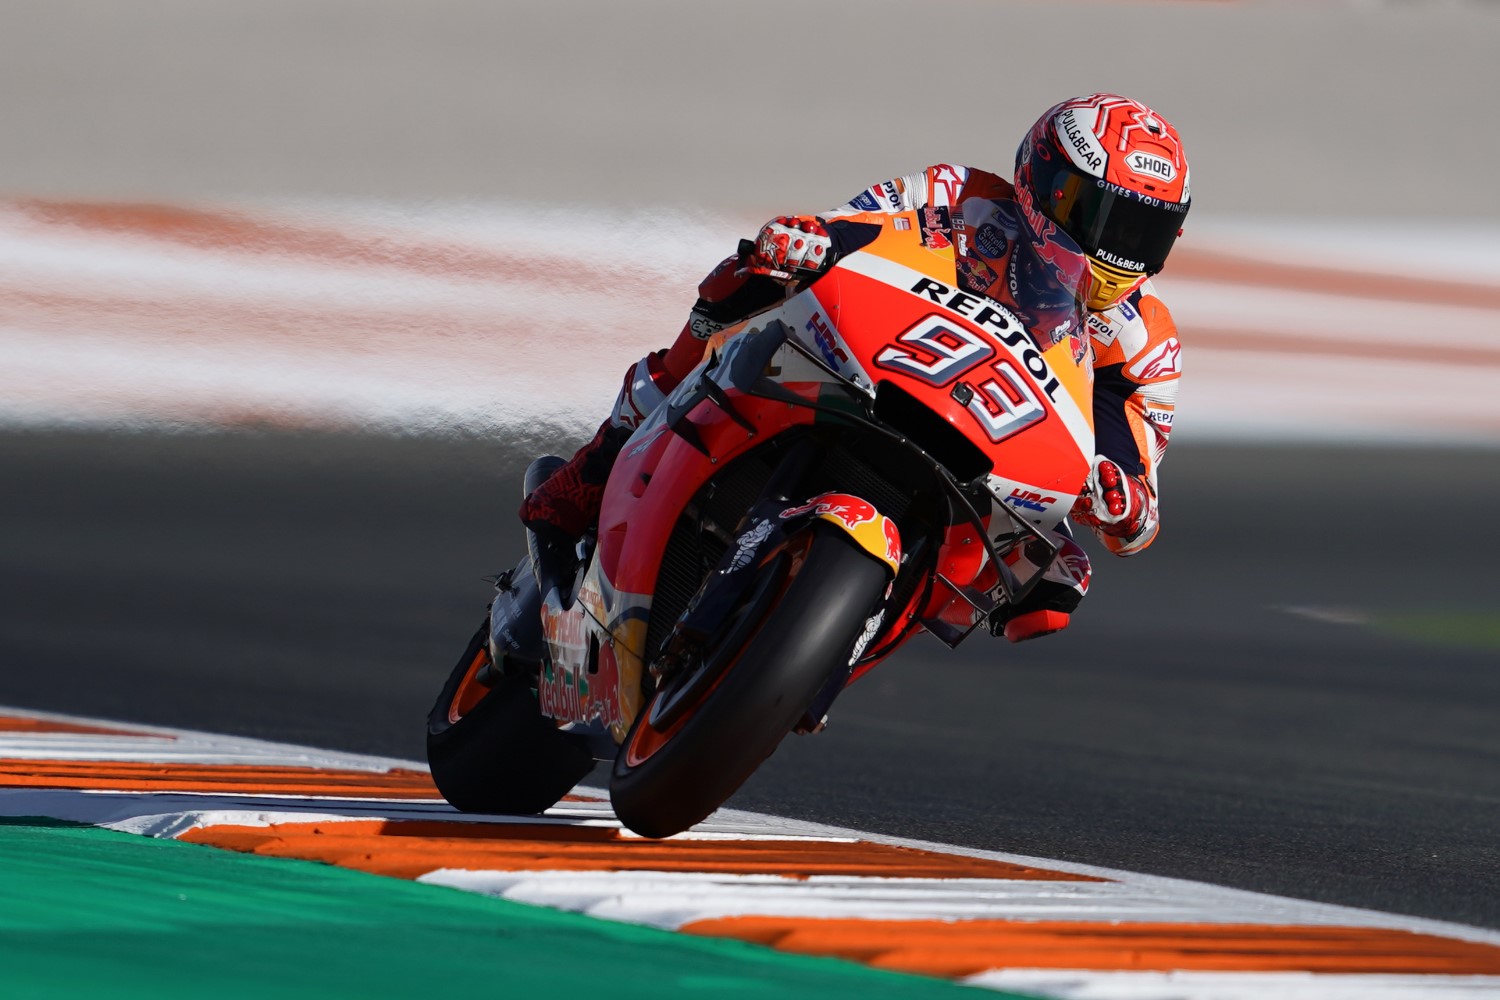 Can Marquez win at home on Sunday?